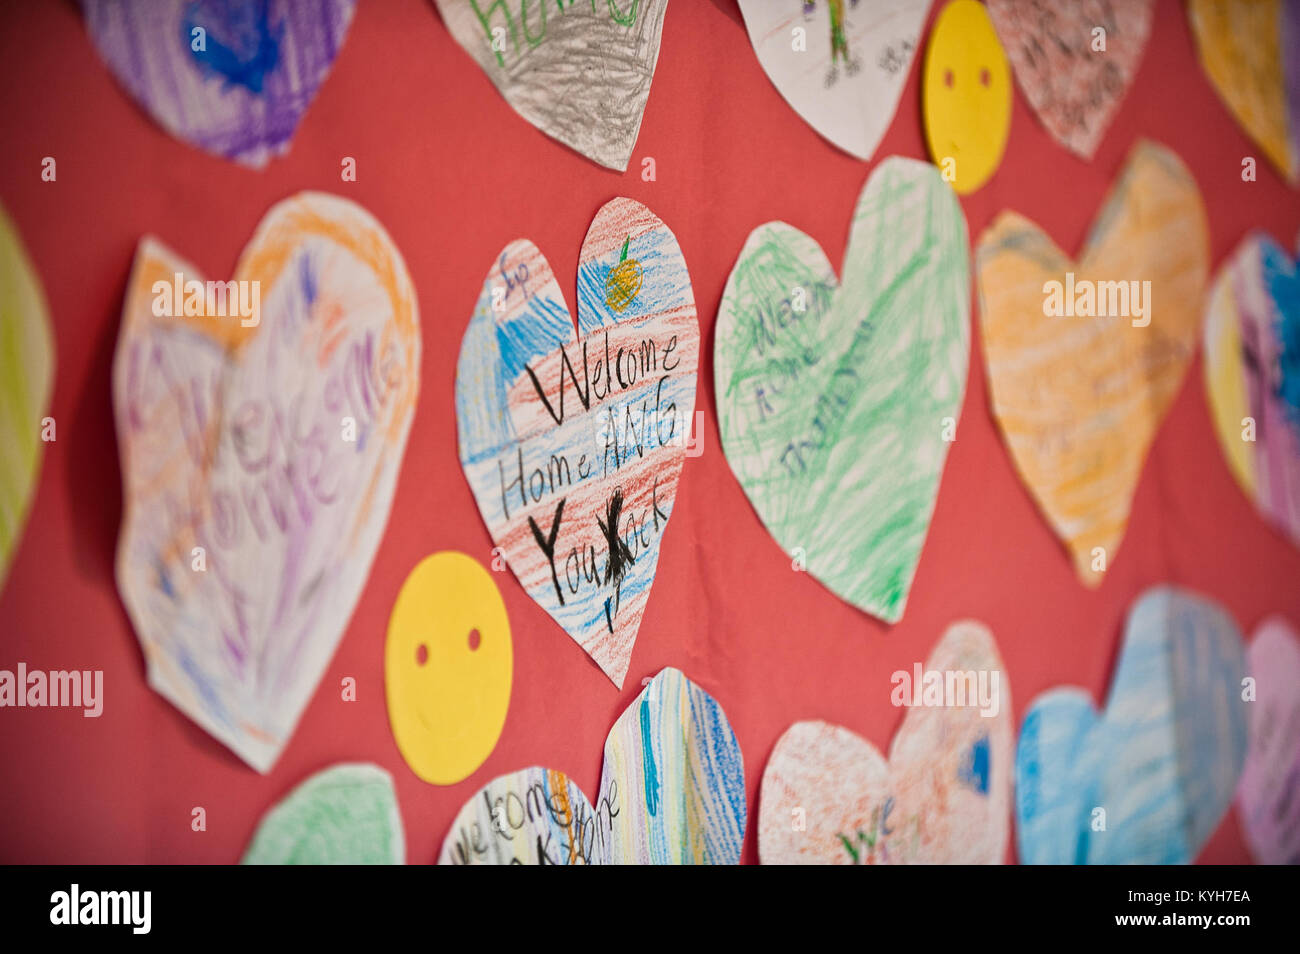 Colorful hearts, made by children at Crums Lane Elementary School in Louisville, Ky., provide a cheerful welcome for 58 Airmen from the 123rd Airlift Wing who returned to Louisville Nov. 10, 2012, after a four-month deployment to the Persian Gulf. The Airmen, all members of the Kentucky Air National Guard, flew daily airlift missions in support of U.S. military operations across the U.S. Central Command Area of Responsibility, which includes Iraq, Afghanistan and Northern Africa. (U.S. Air Force photo by Maj. Dale Greer) Stock Photo